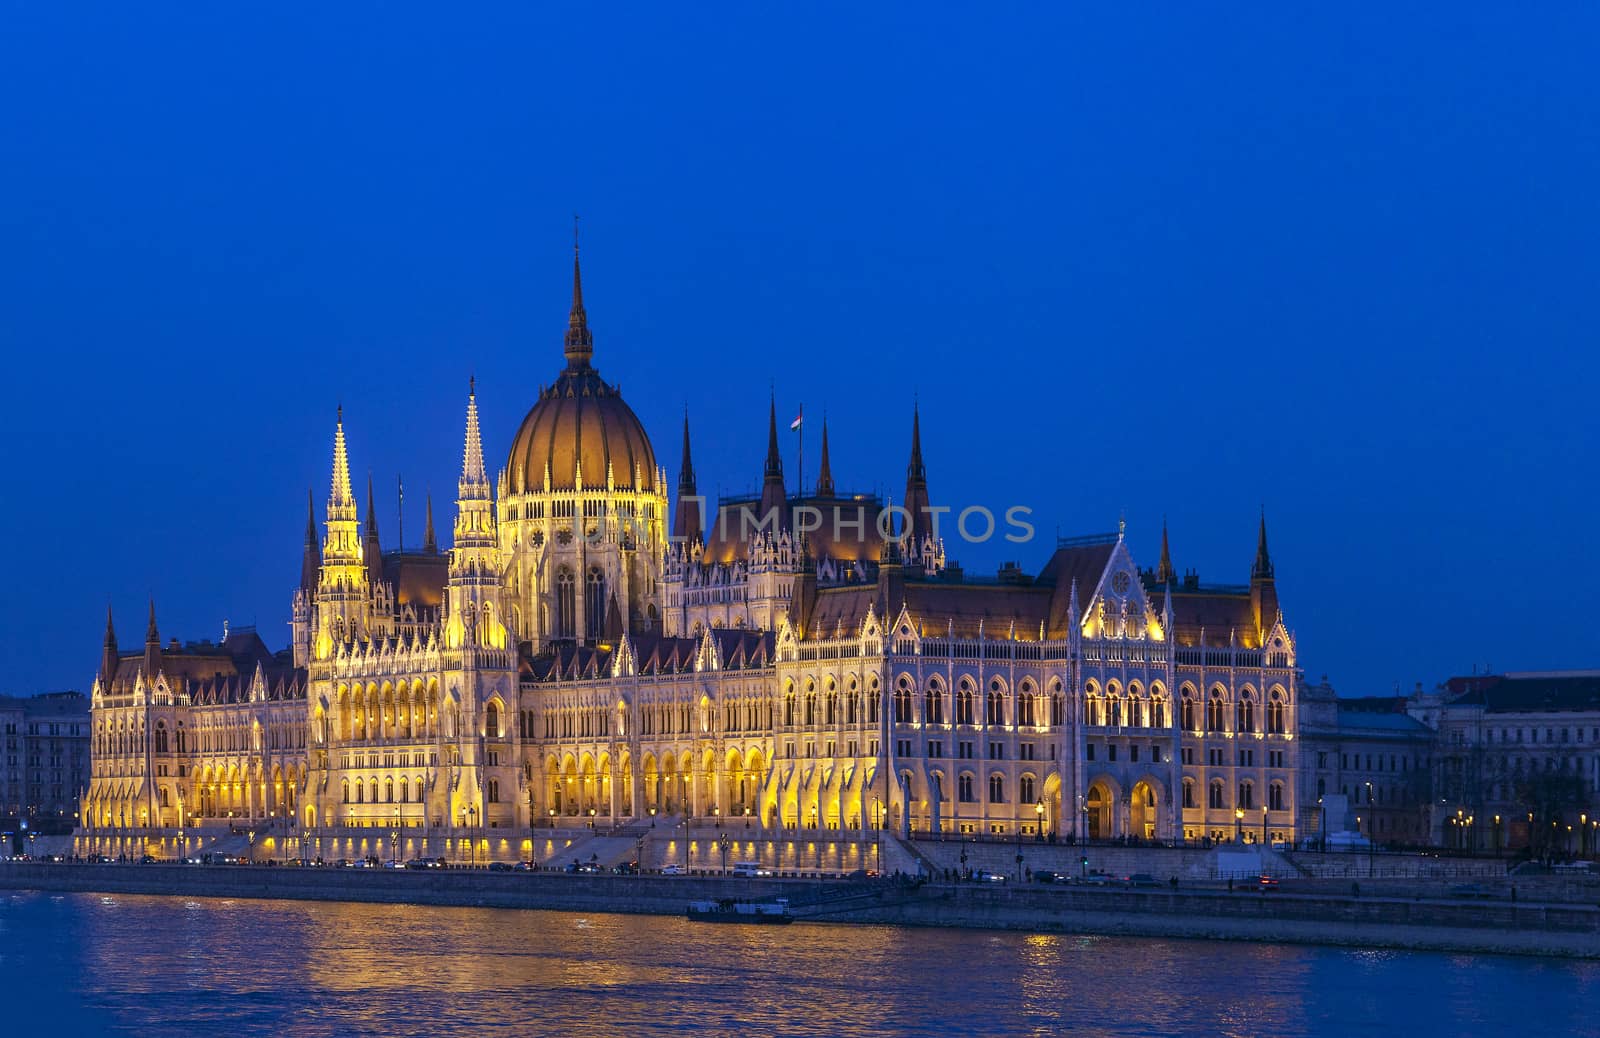 Hungarian parliament in Budapest, illuminated building in the night by Goodday